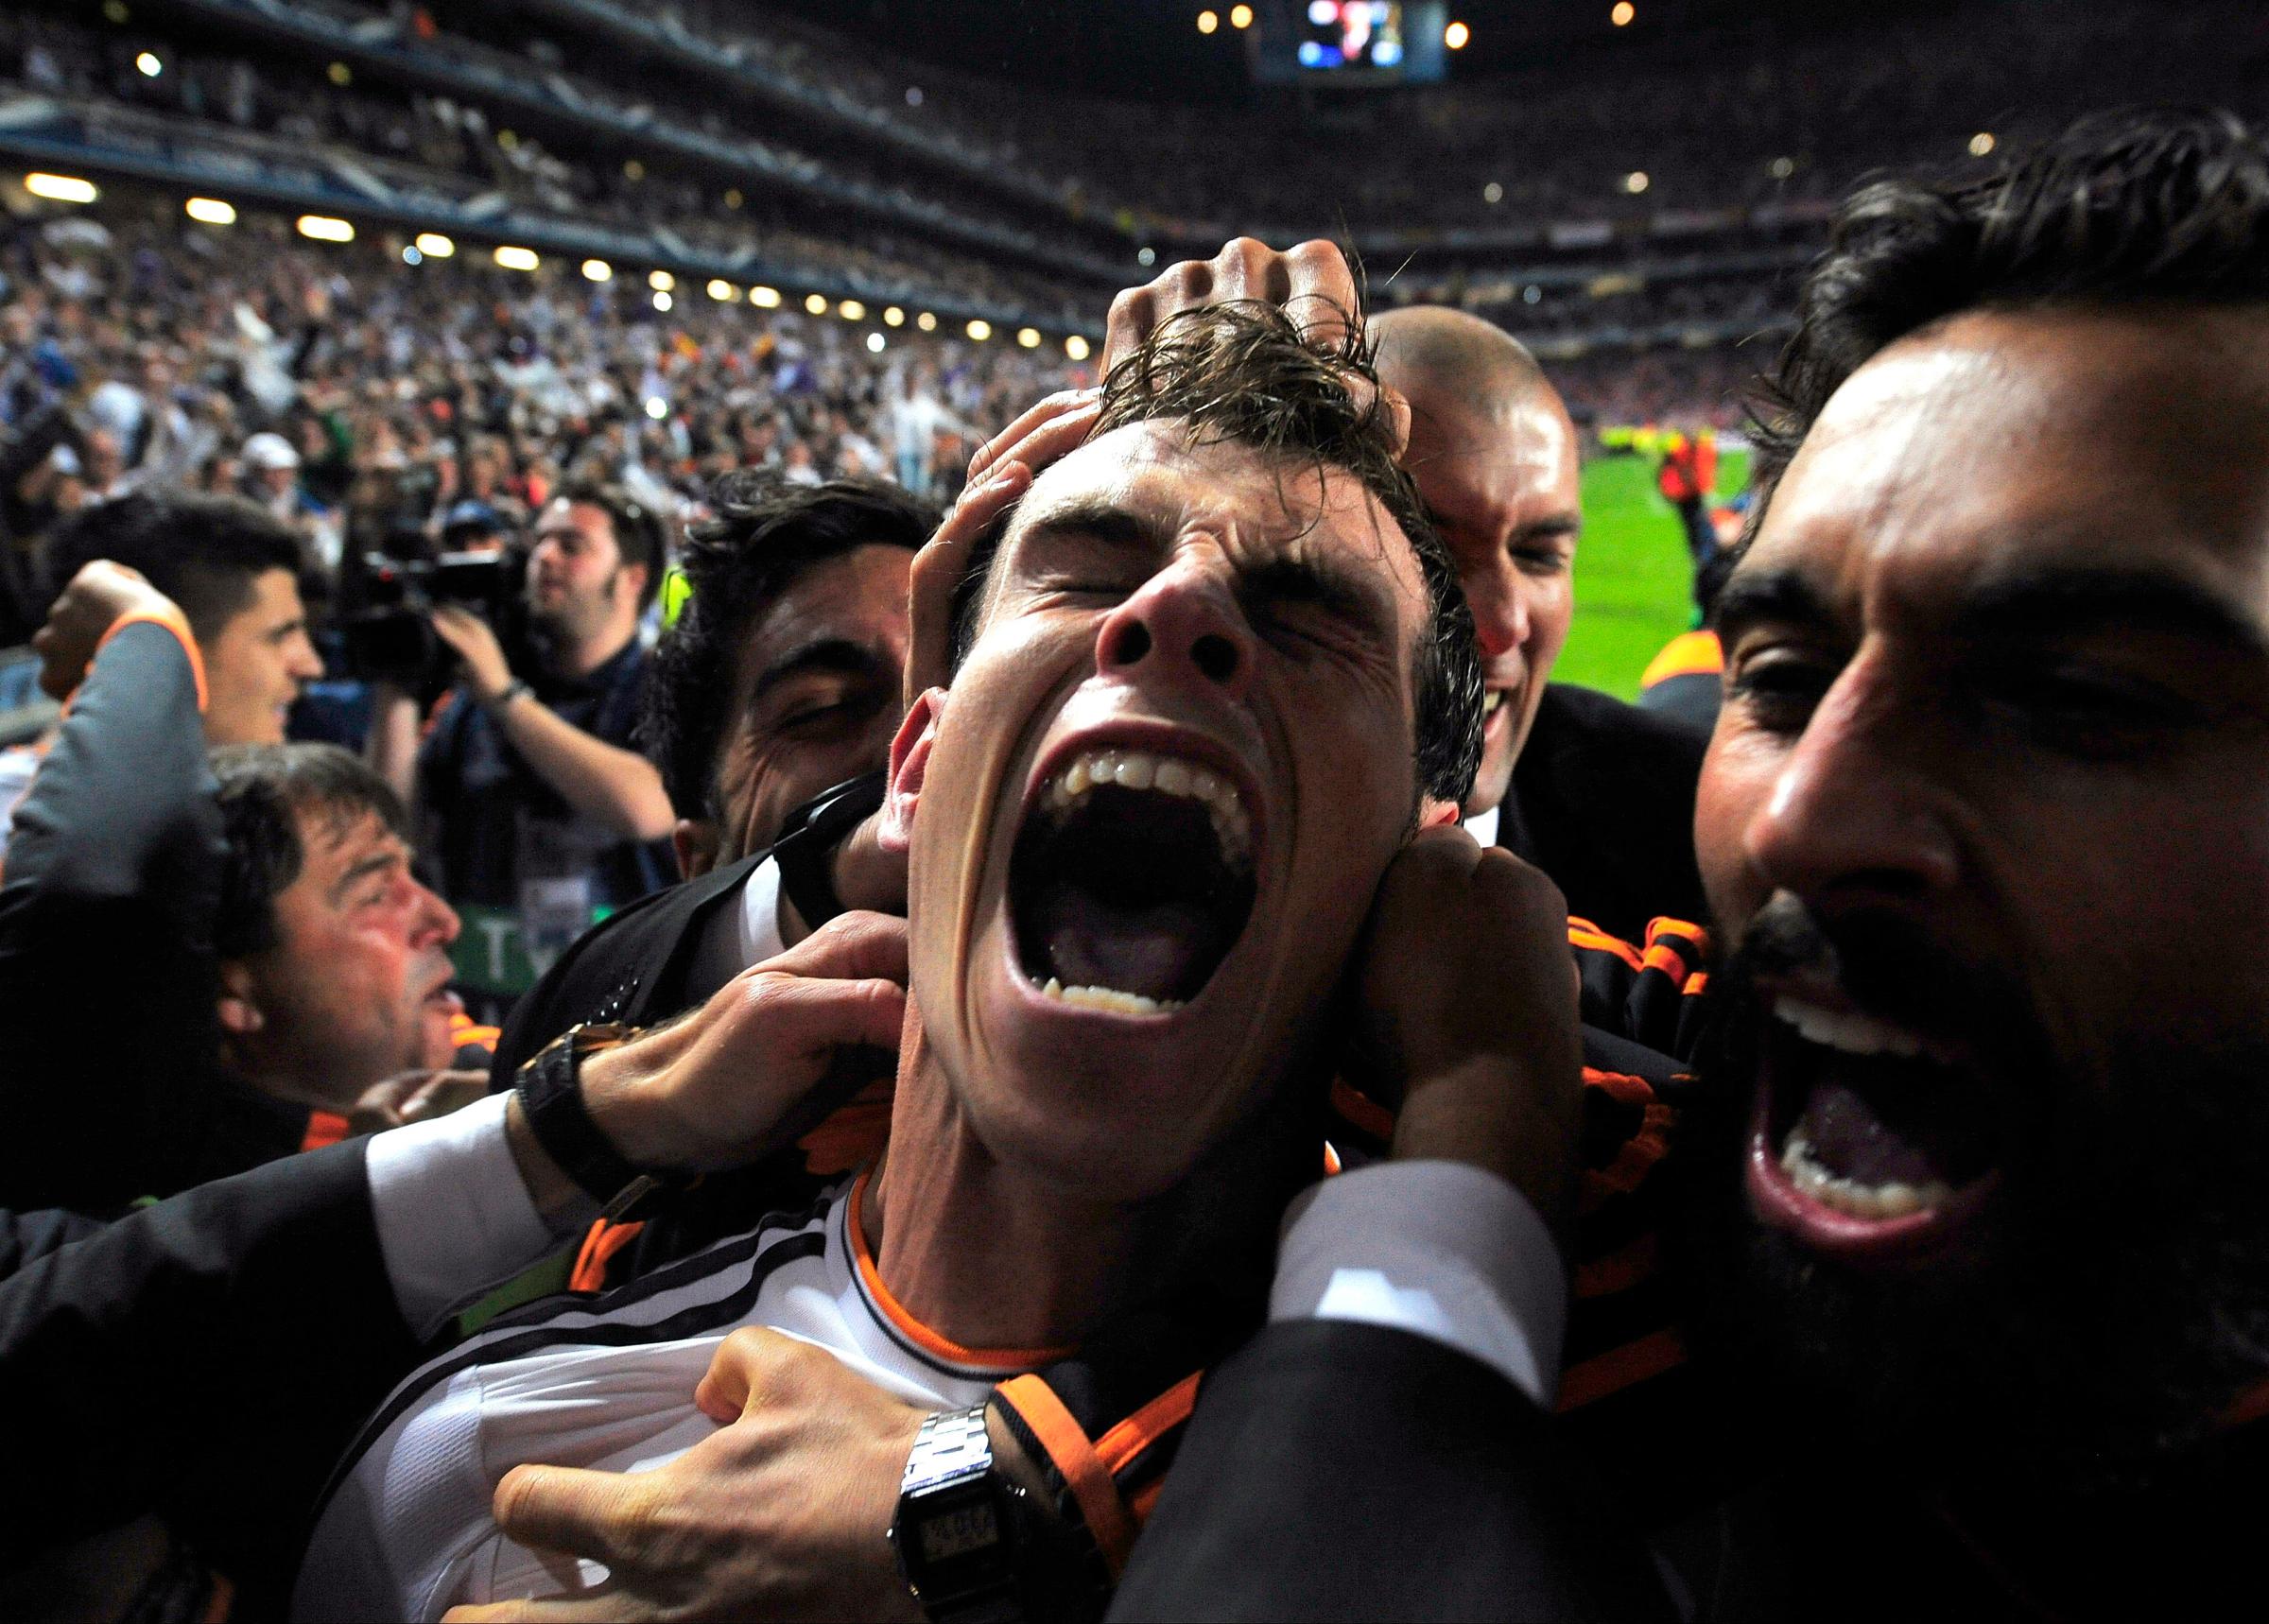 Real Madrid's Gareth Bale celebrates with teammates after scoring his second goal in the Champions League final soccer match against Atletico Madrid at the Luz Stadium in Lisbon on May 24, 2014.